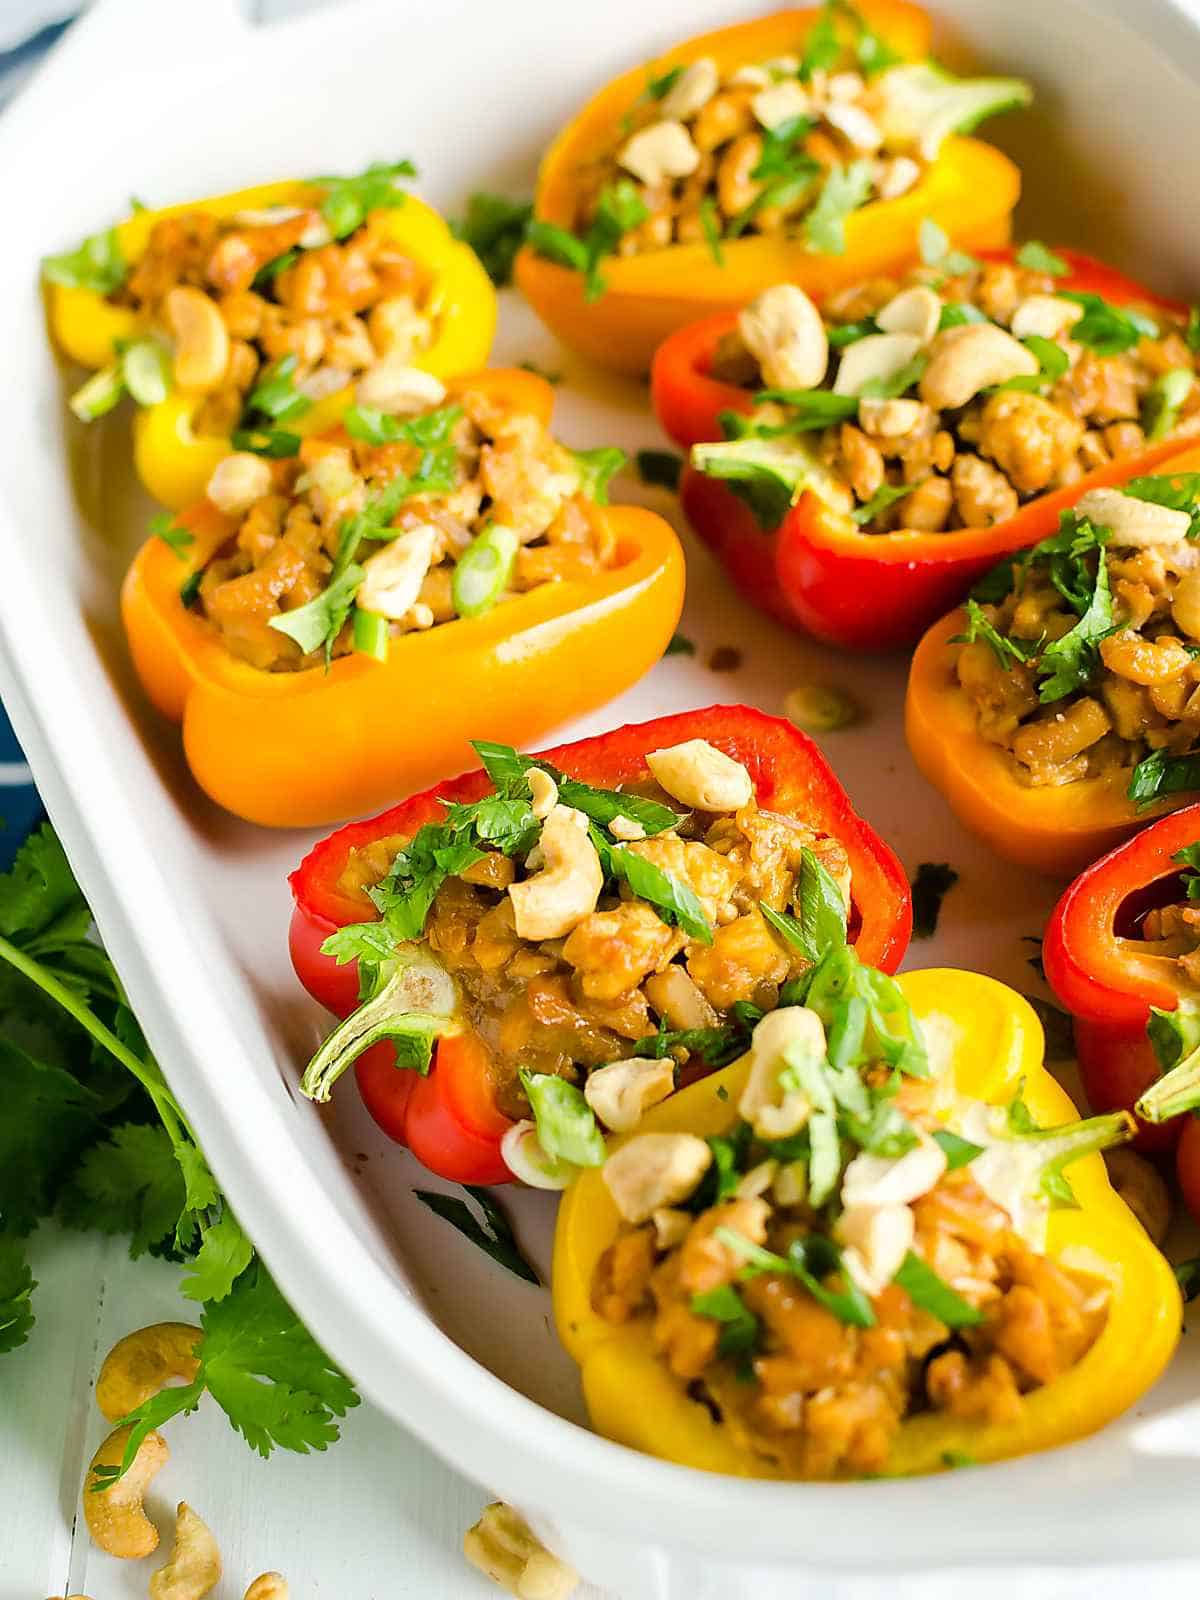 dish of stuffed bell peppers filled with Asian chicken stuffing and topped with peanuts and cilantro.